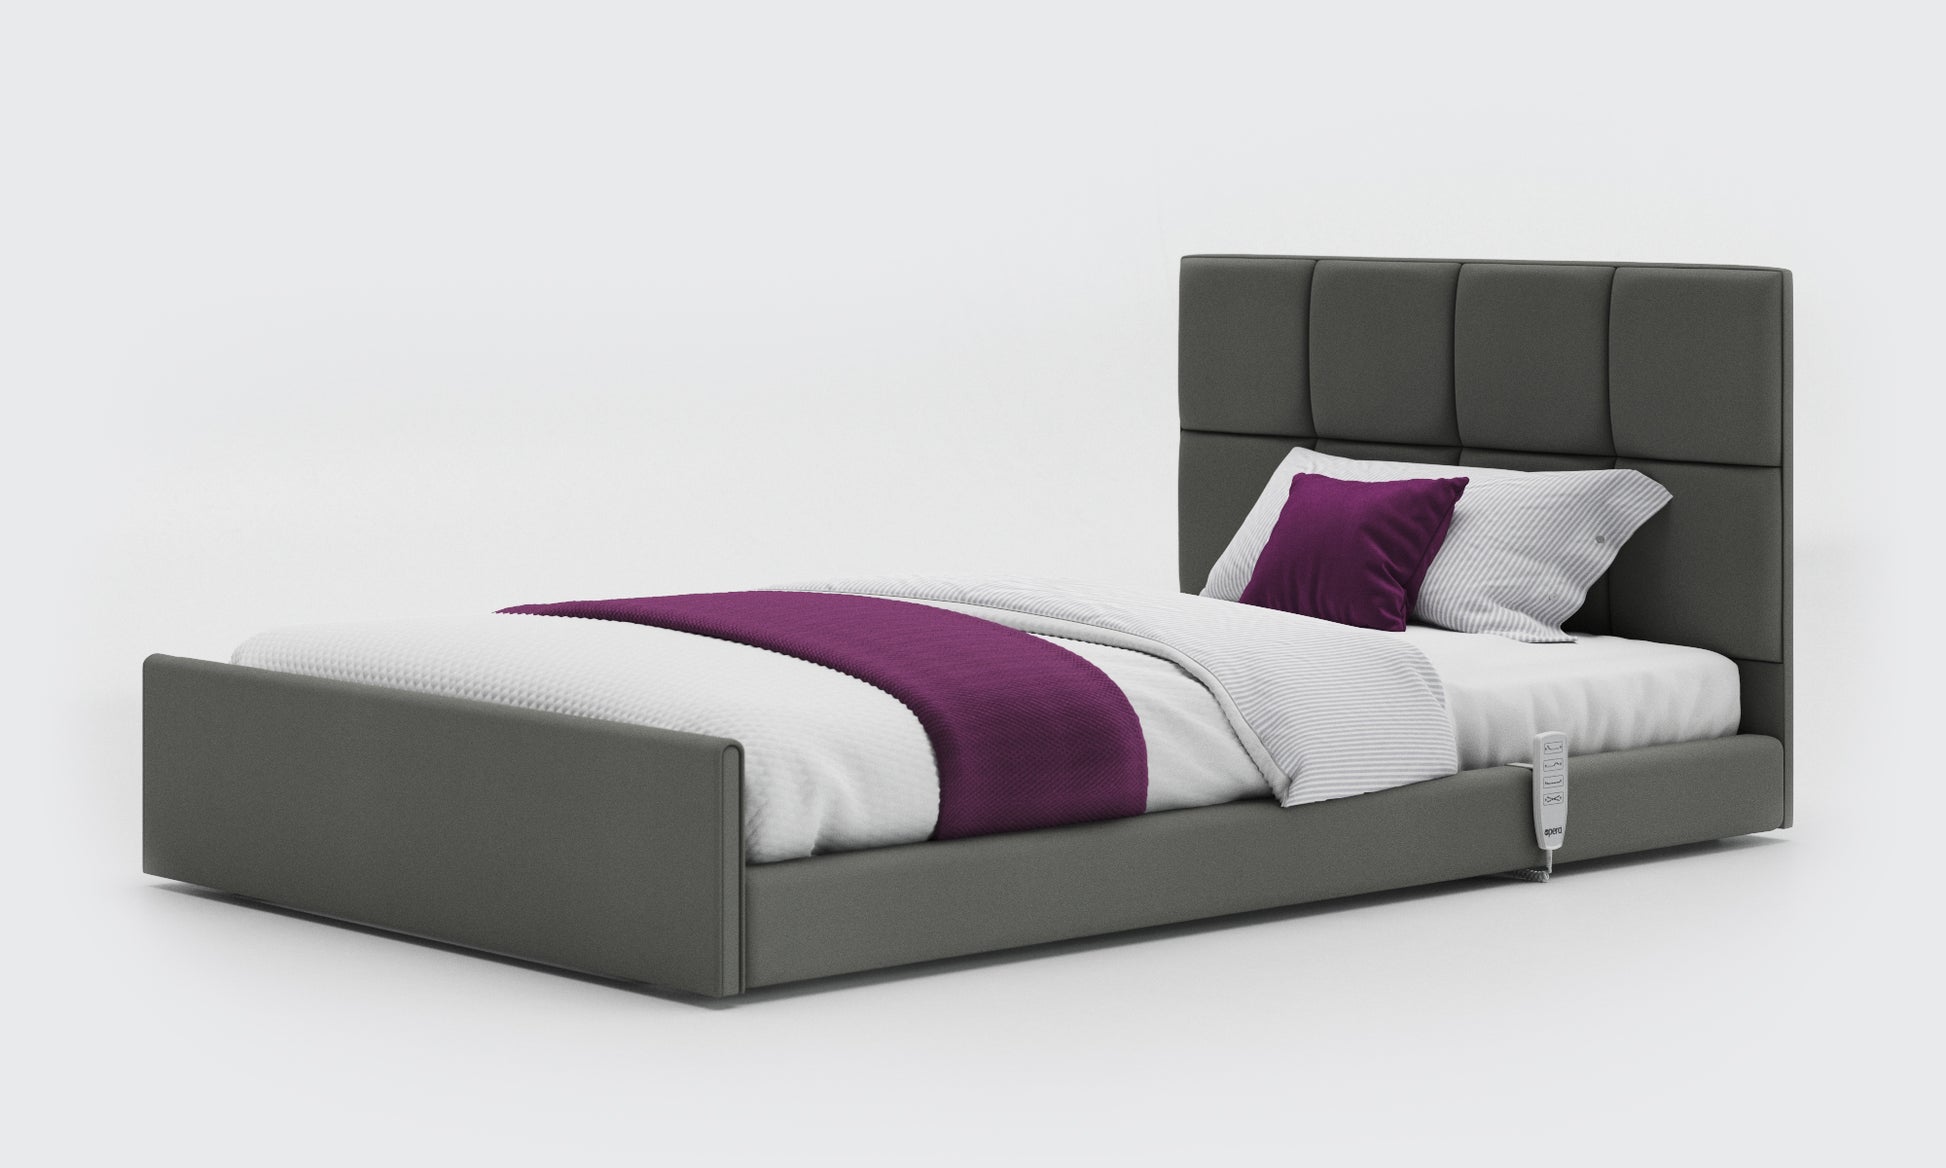 solo comfort bed 4ft with an opal headboard in lichtgrau leather